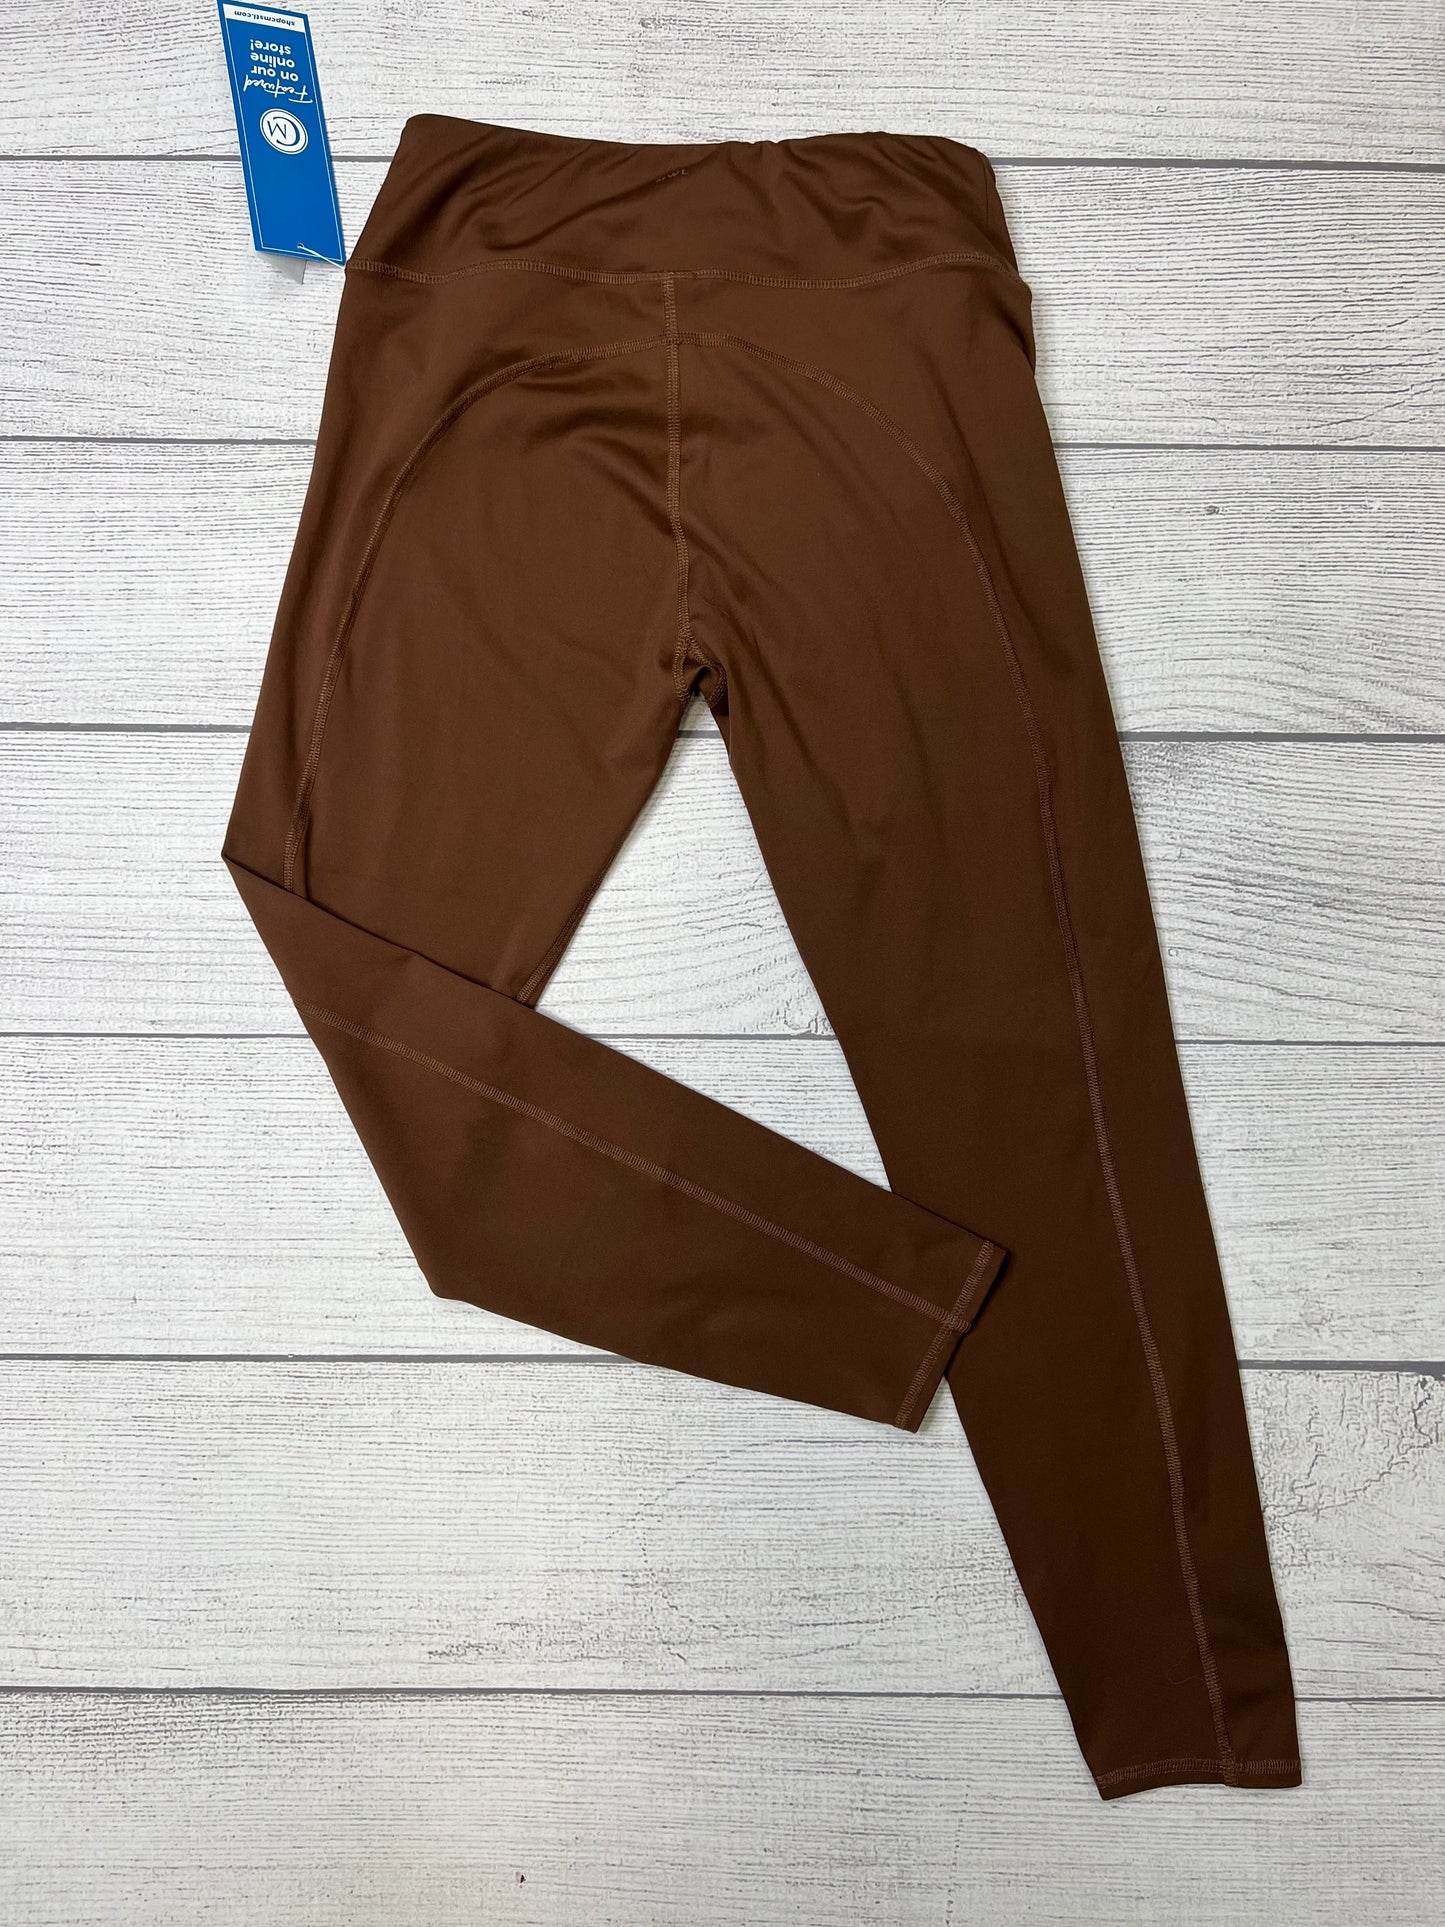 Brown Athletic Leggings Madewell, Size L